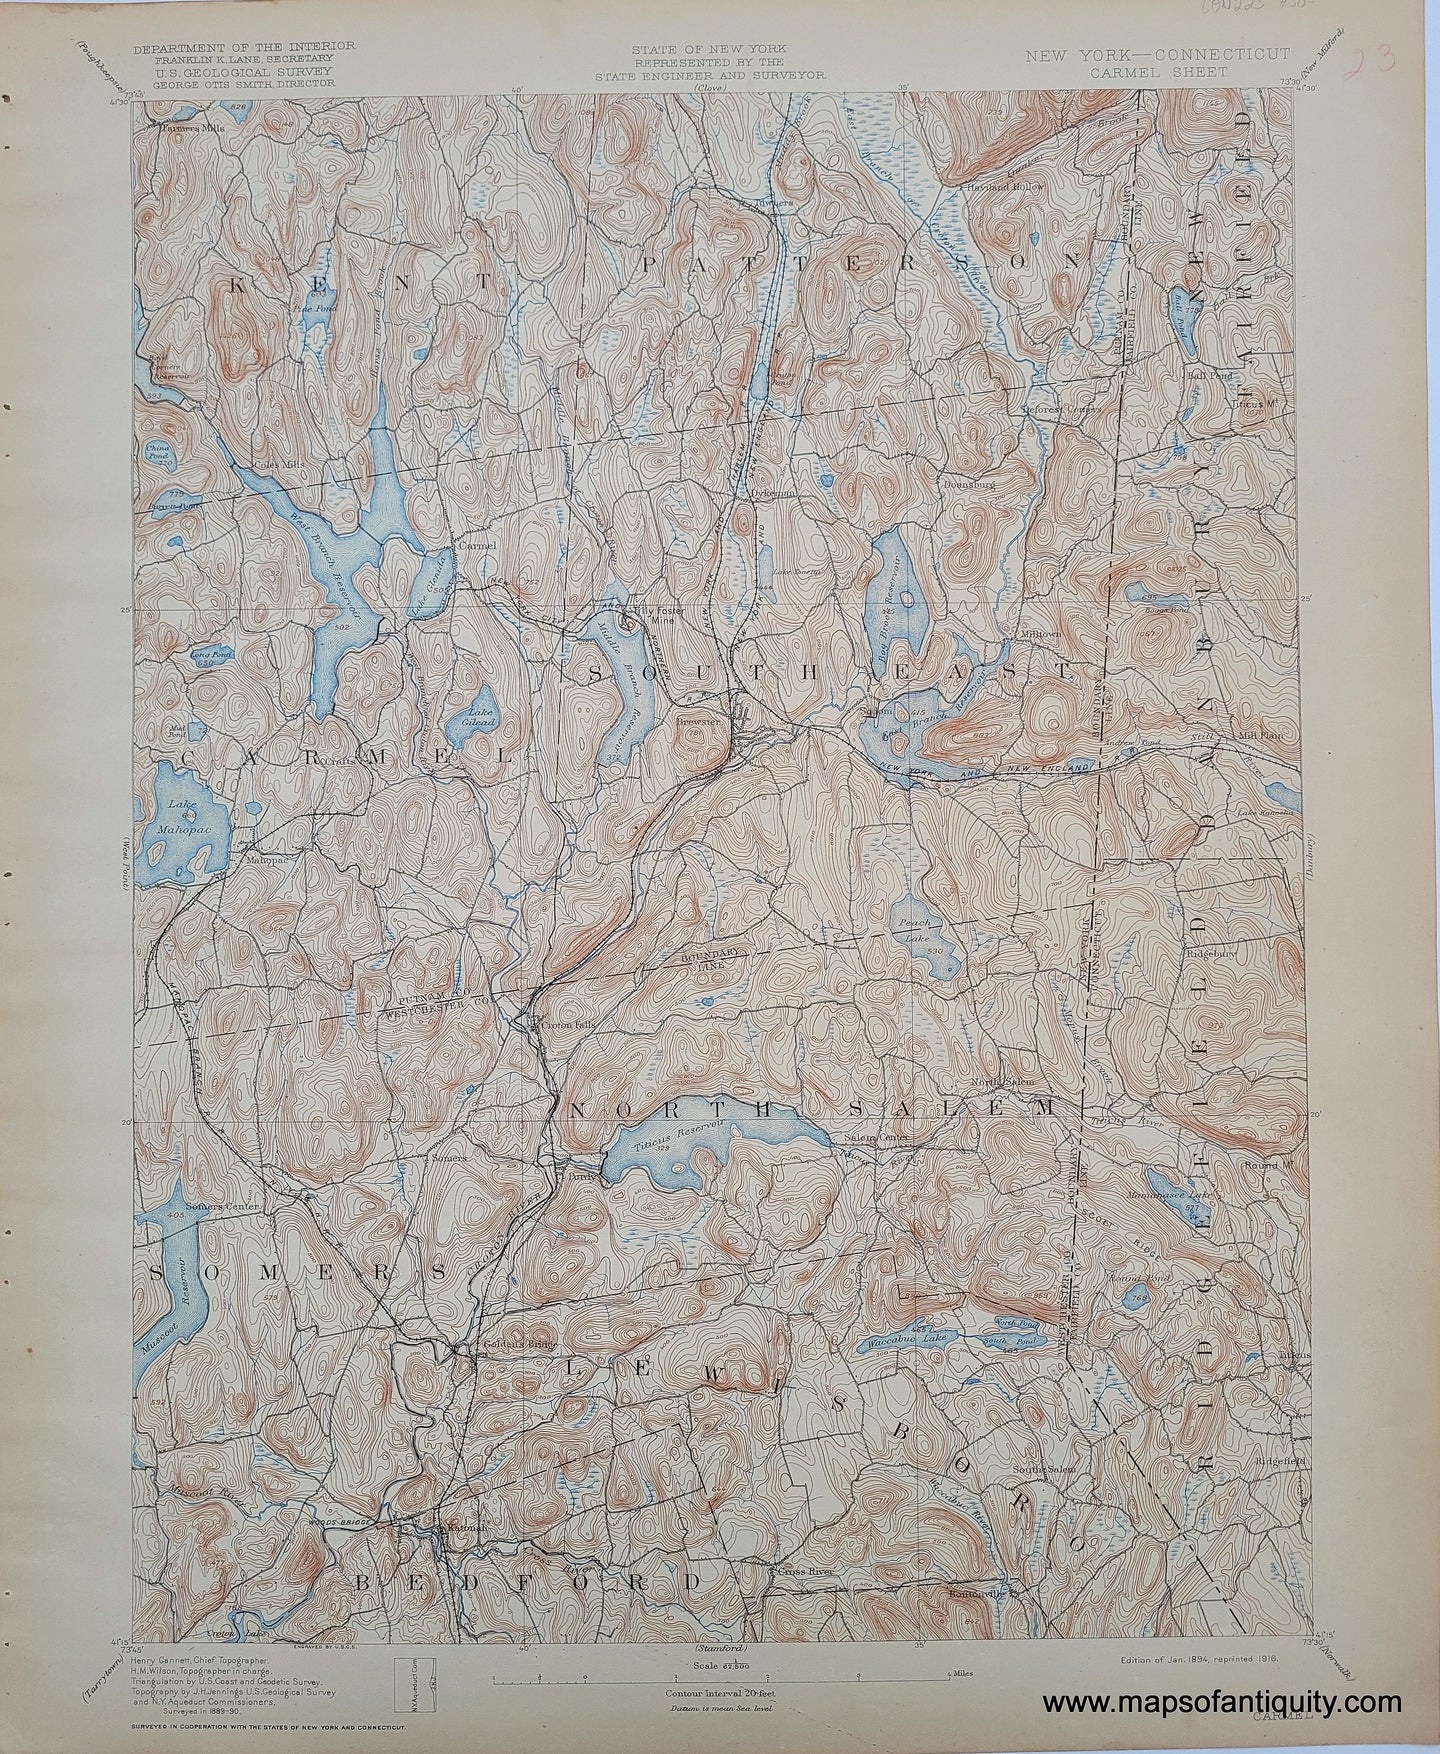 Antique-Topographical-Map-Topography-Connecticut-CT-Carmel-Sheet-USGS-United-States-Geological-Survey-Maps-of-Antiquity